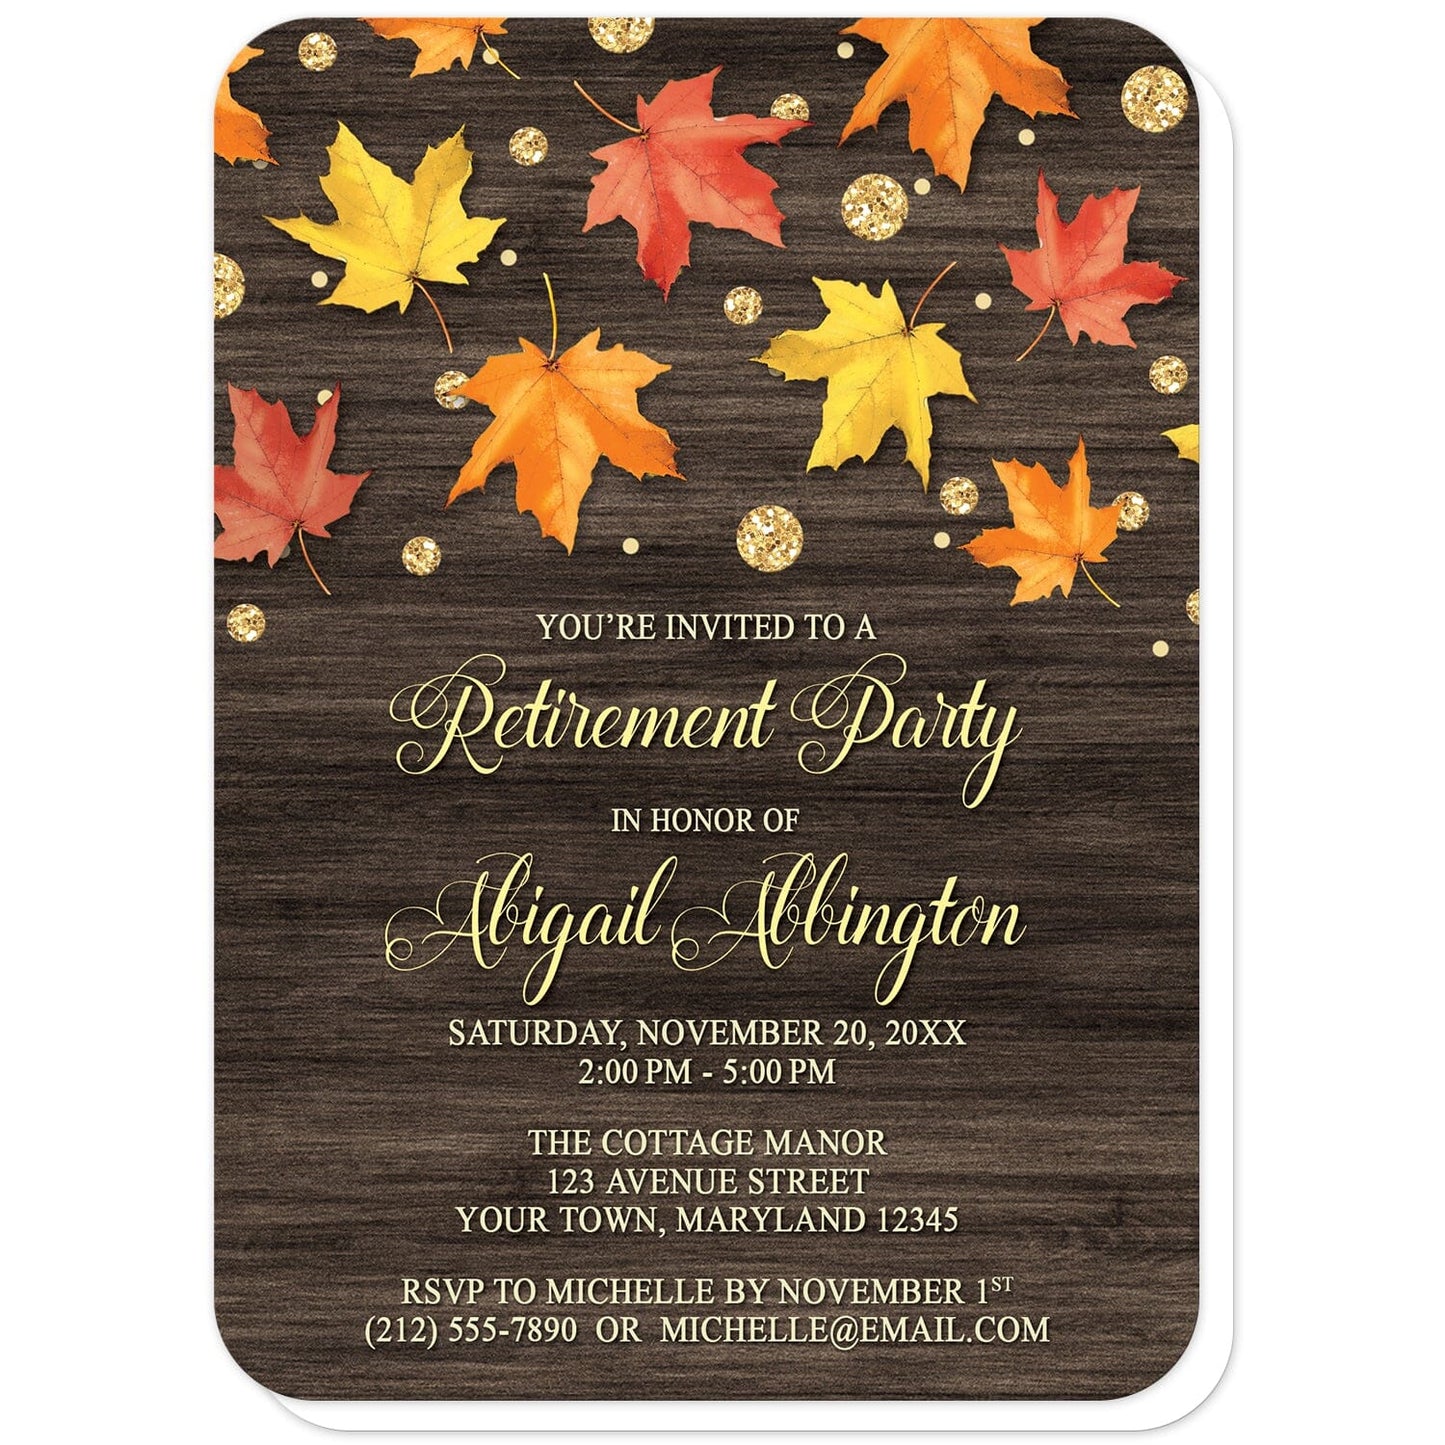 Falling Leaves with Gold Autumn Retirement Invitations (with rounded corners) at Artistically Invited. Beautiful rustic falling leaves with gold autumn retirement invitations with red, orange, and yellow leaves scattered and falling along the top, coupled with gold-colored glitter-illustrated circles, over a dark brown wood background. Your personalized retirement party details are custom printed in a very light yellow and gold over the wood background.